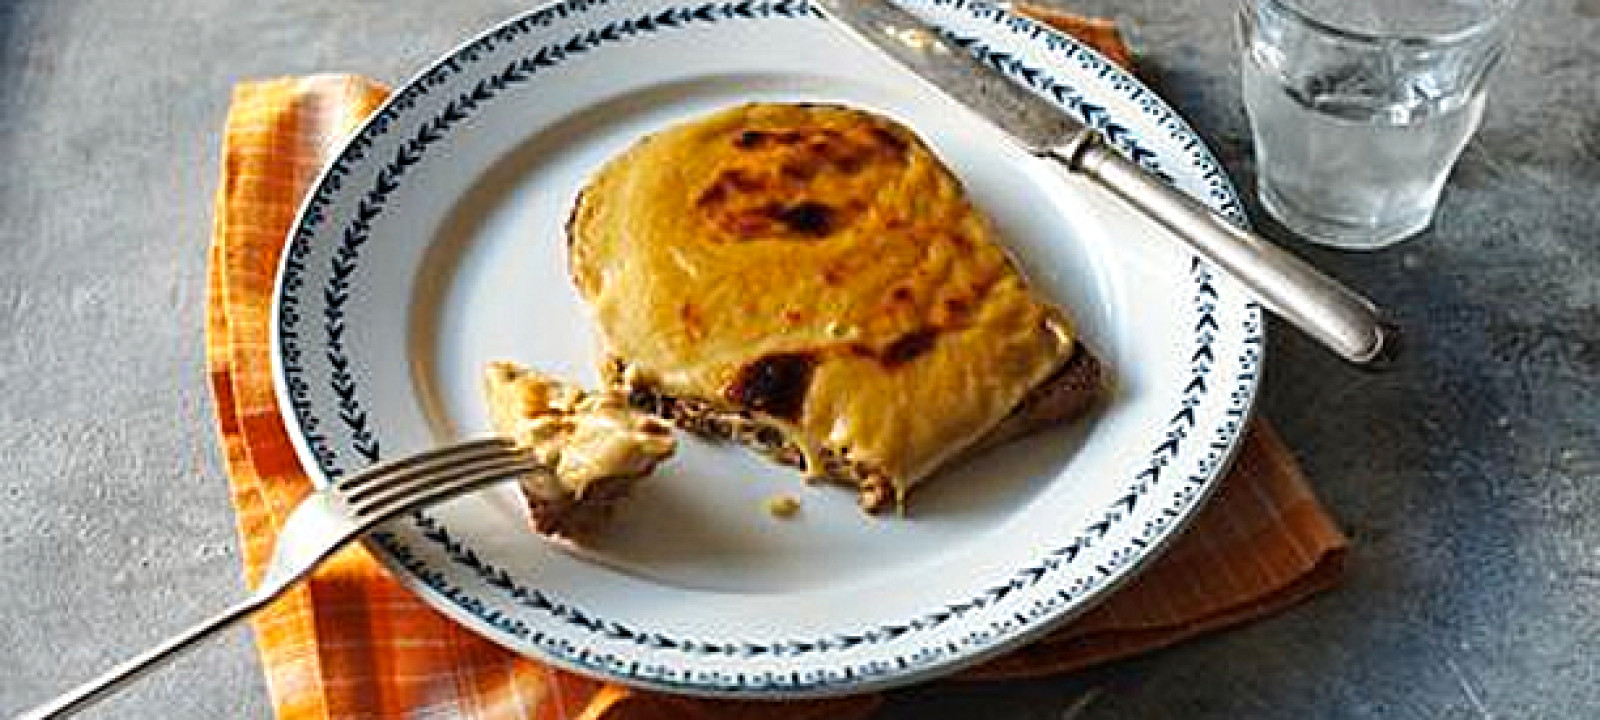 Welsh Rarebit Day: What Exactly is a 'Rarebit'? | Anglophenia | BBC America